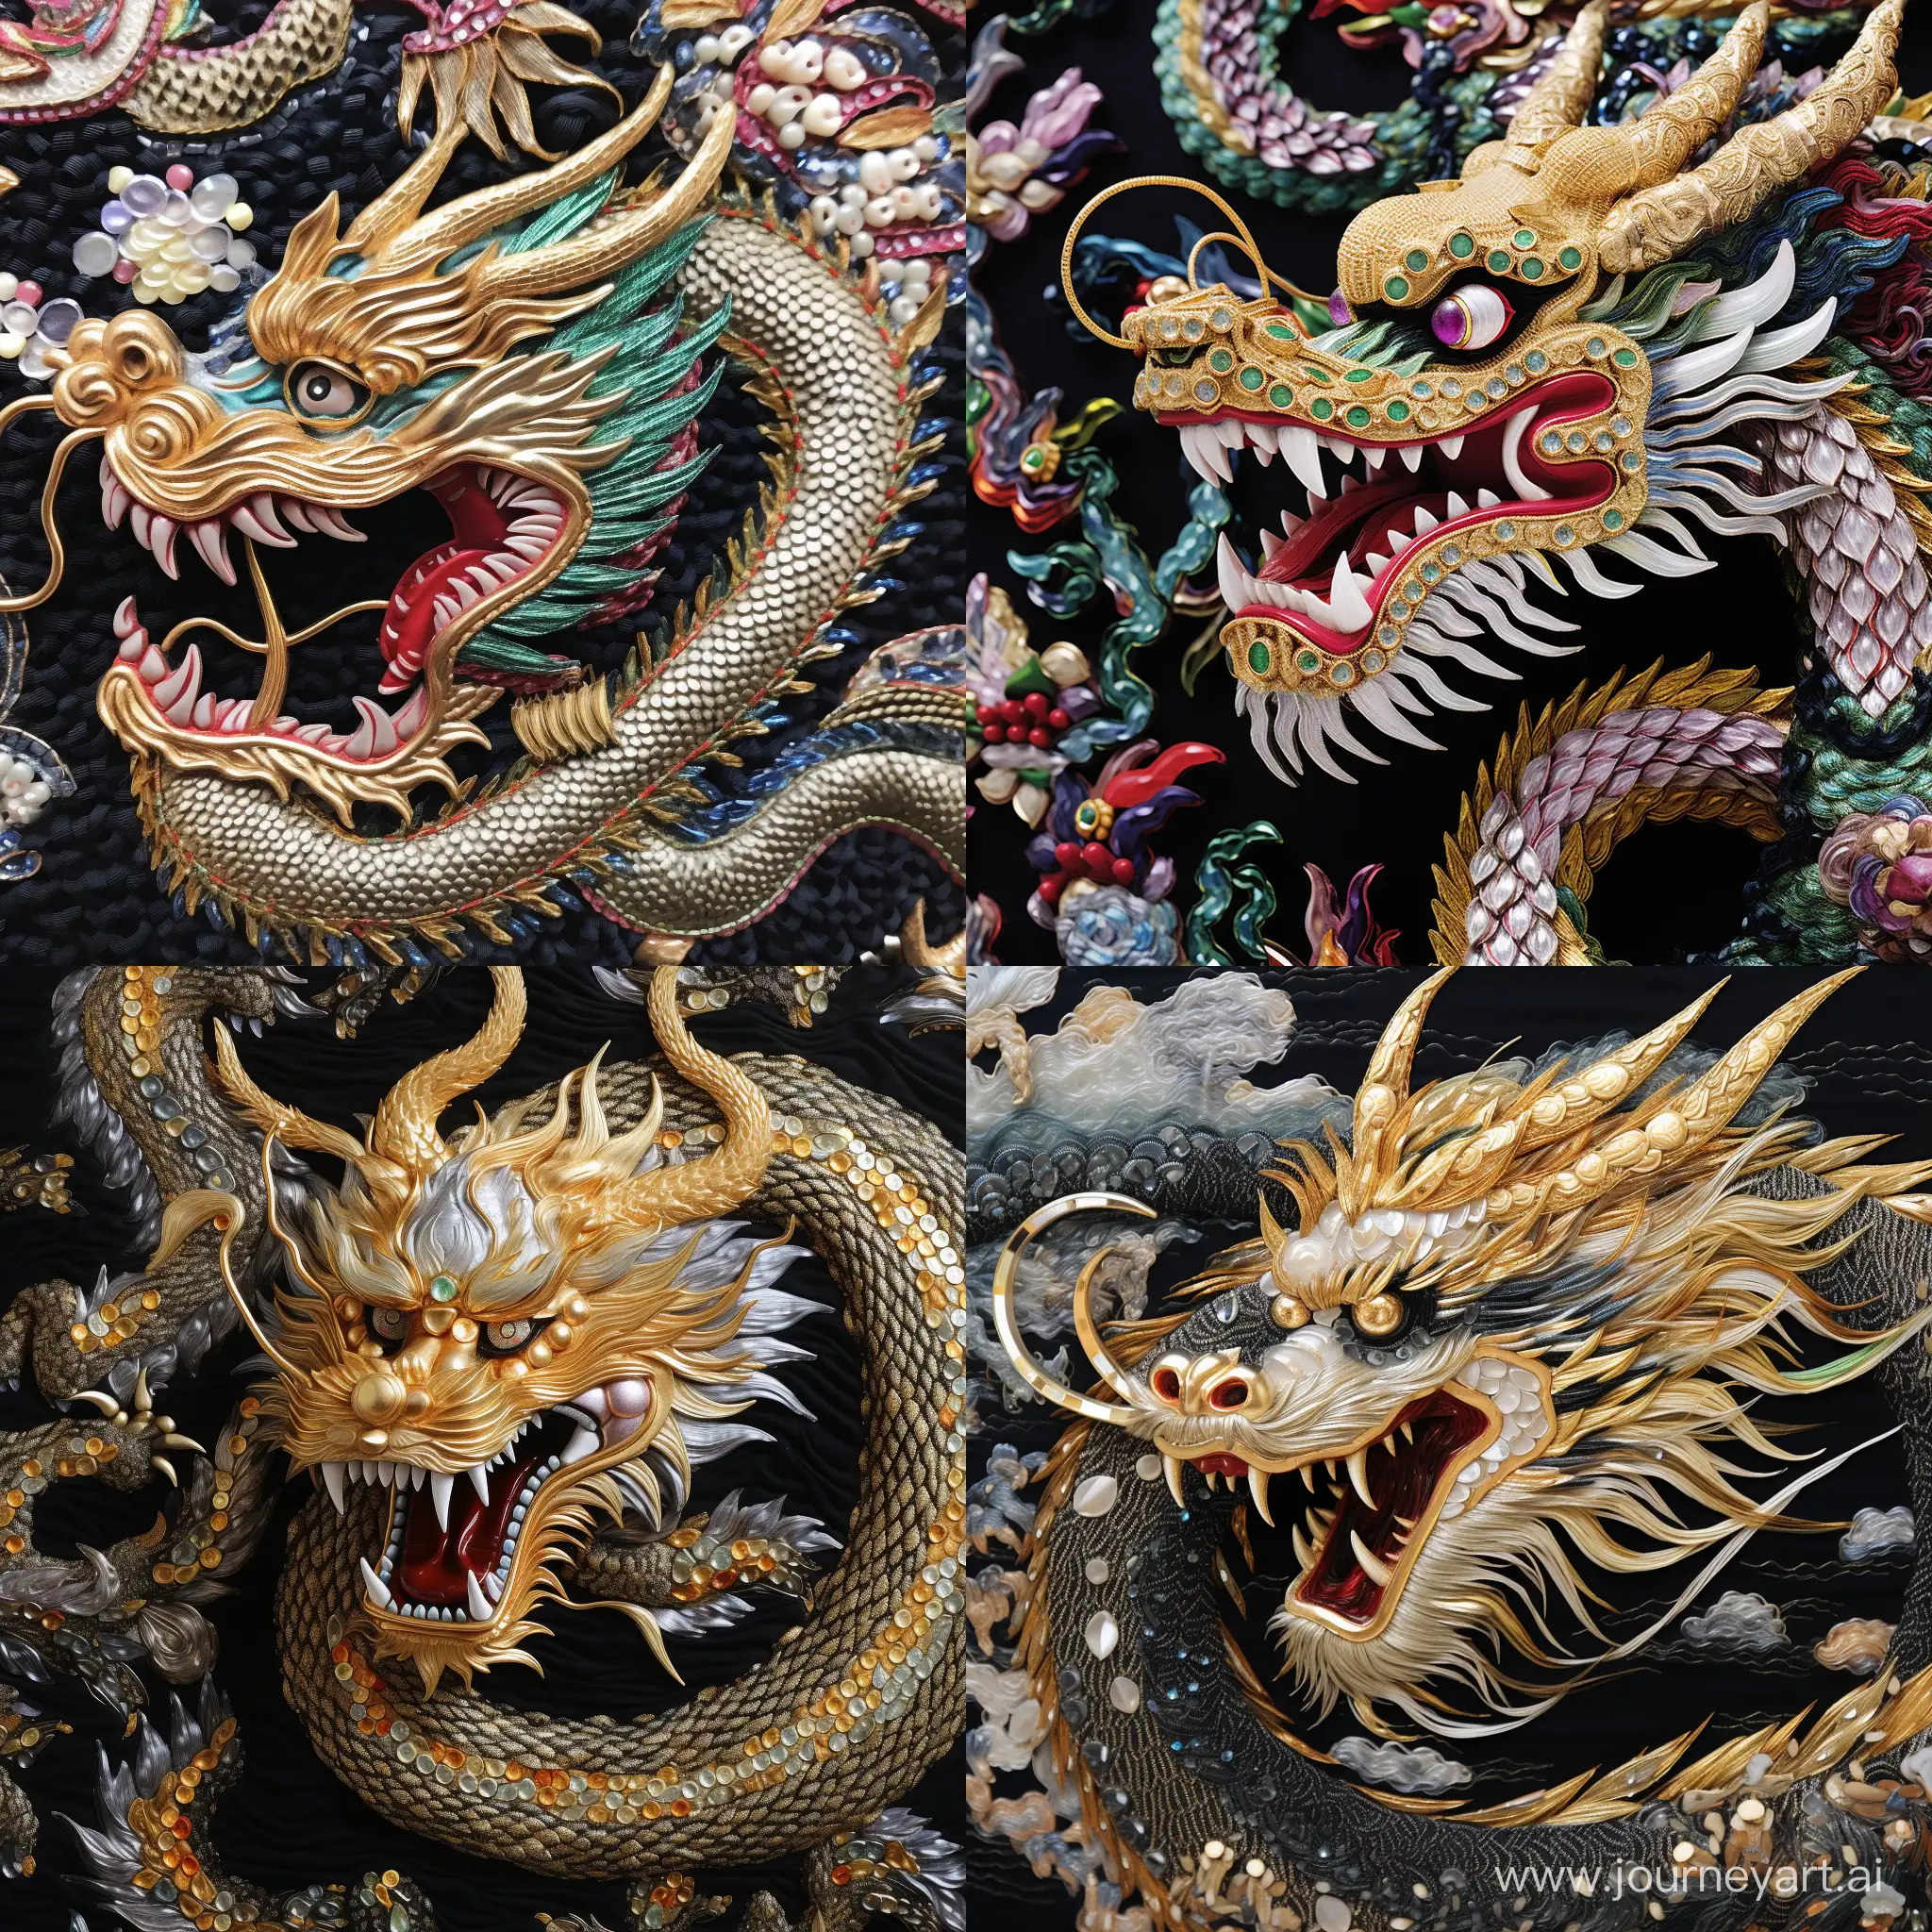 Exquisite-64K-Japanese-Dragon-Embroidery-Iconic-Patterns-in-Sharp-Focus